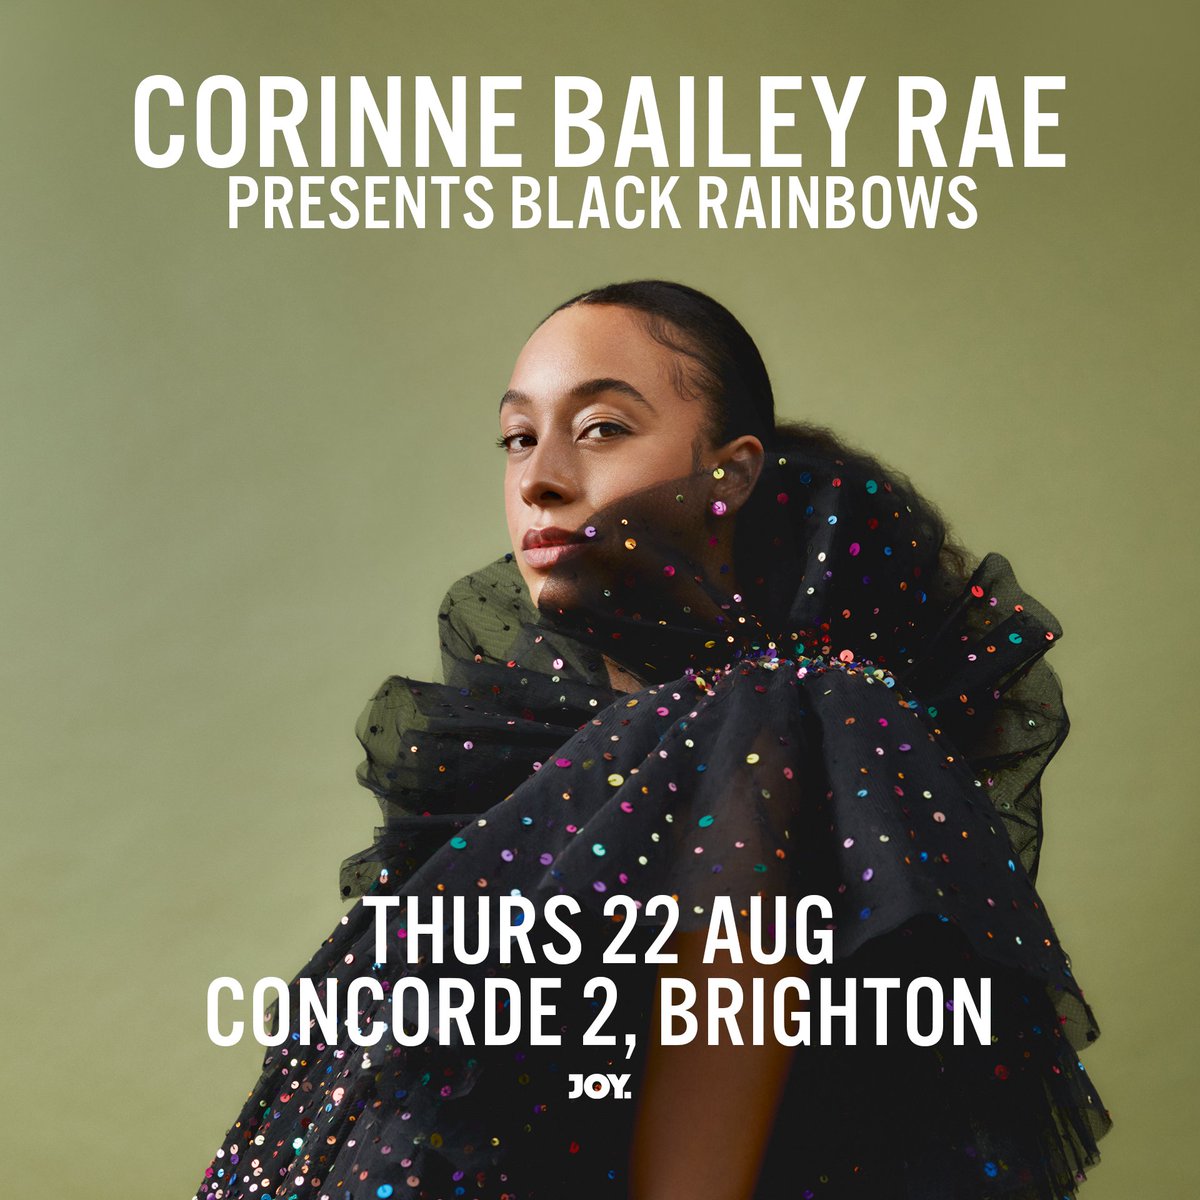 ON SALE NOW 📣 @CorinneBRae presents Black Rainbows! We can't wait to join Corrine Bailey Rae this August at Concorde 2, celebrating the new album 'Black Rainbows'. 🎟 On sale now - bit.ly/3xI4Mvx